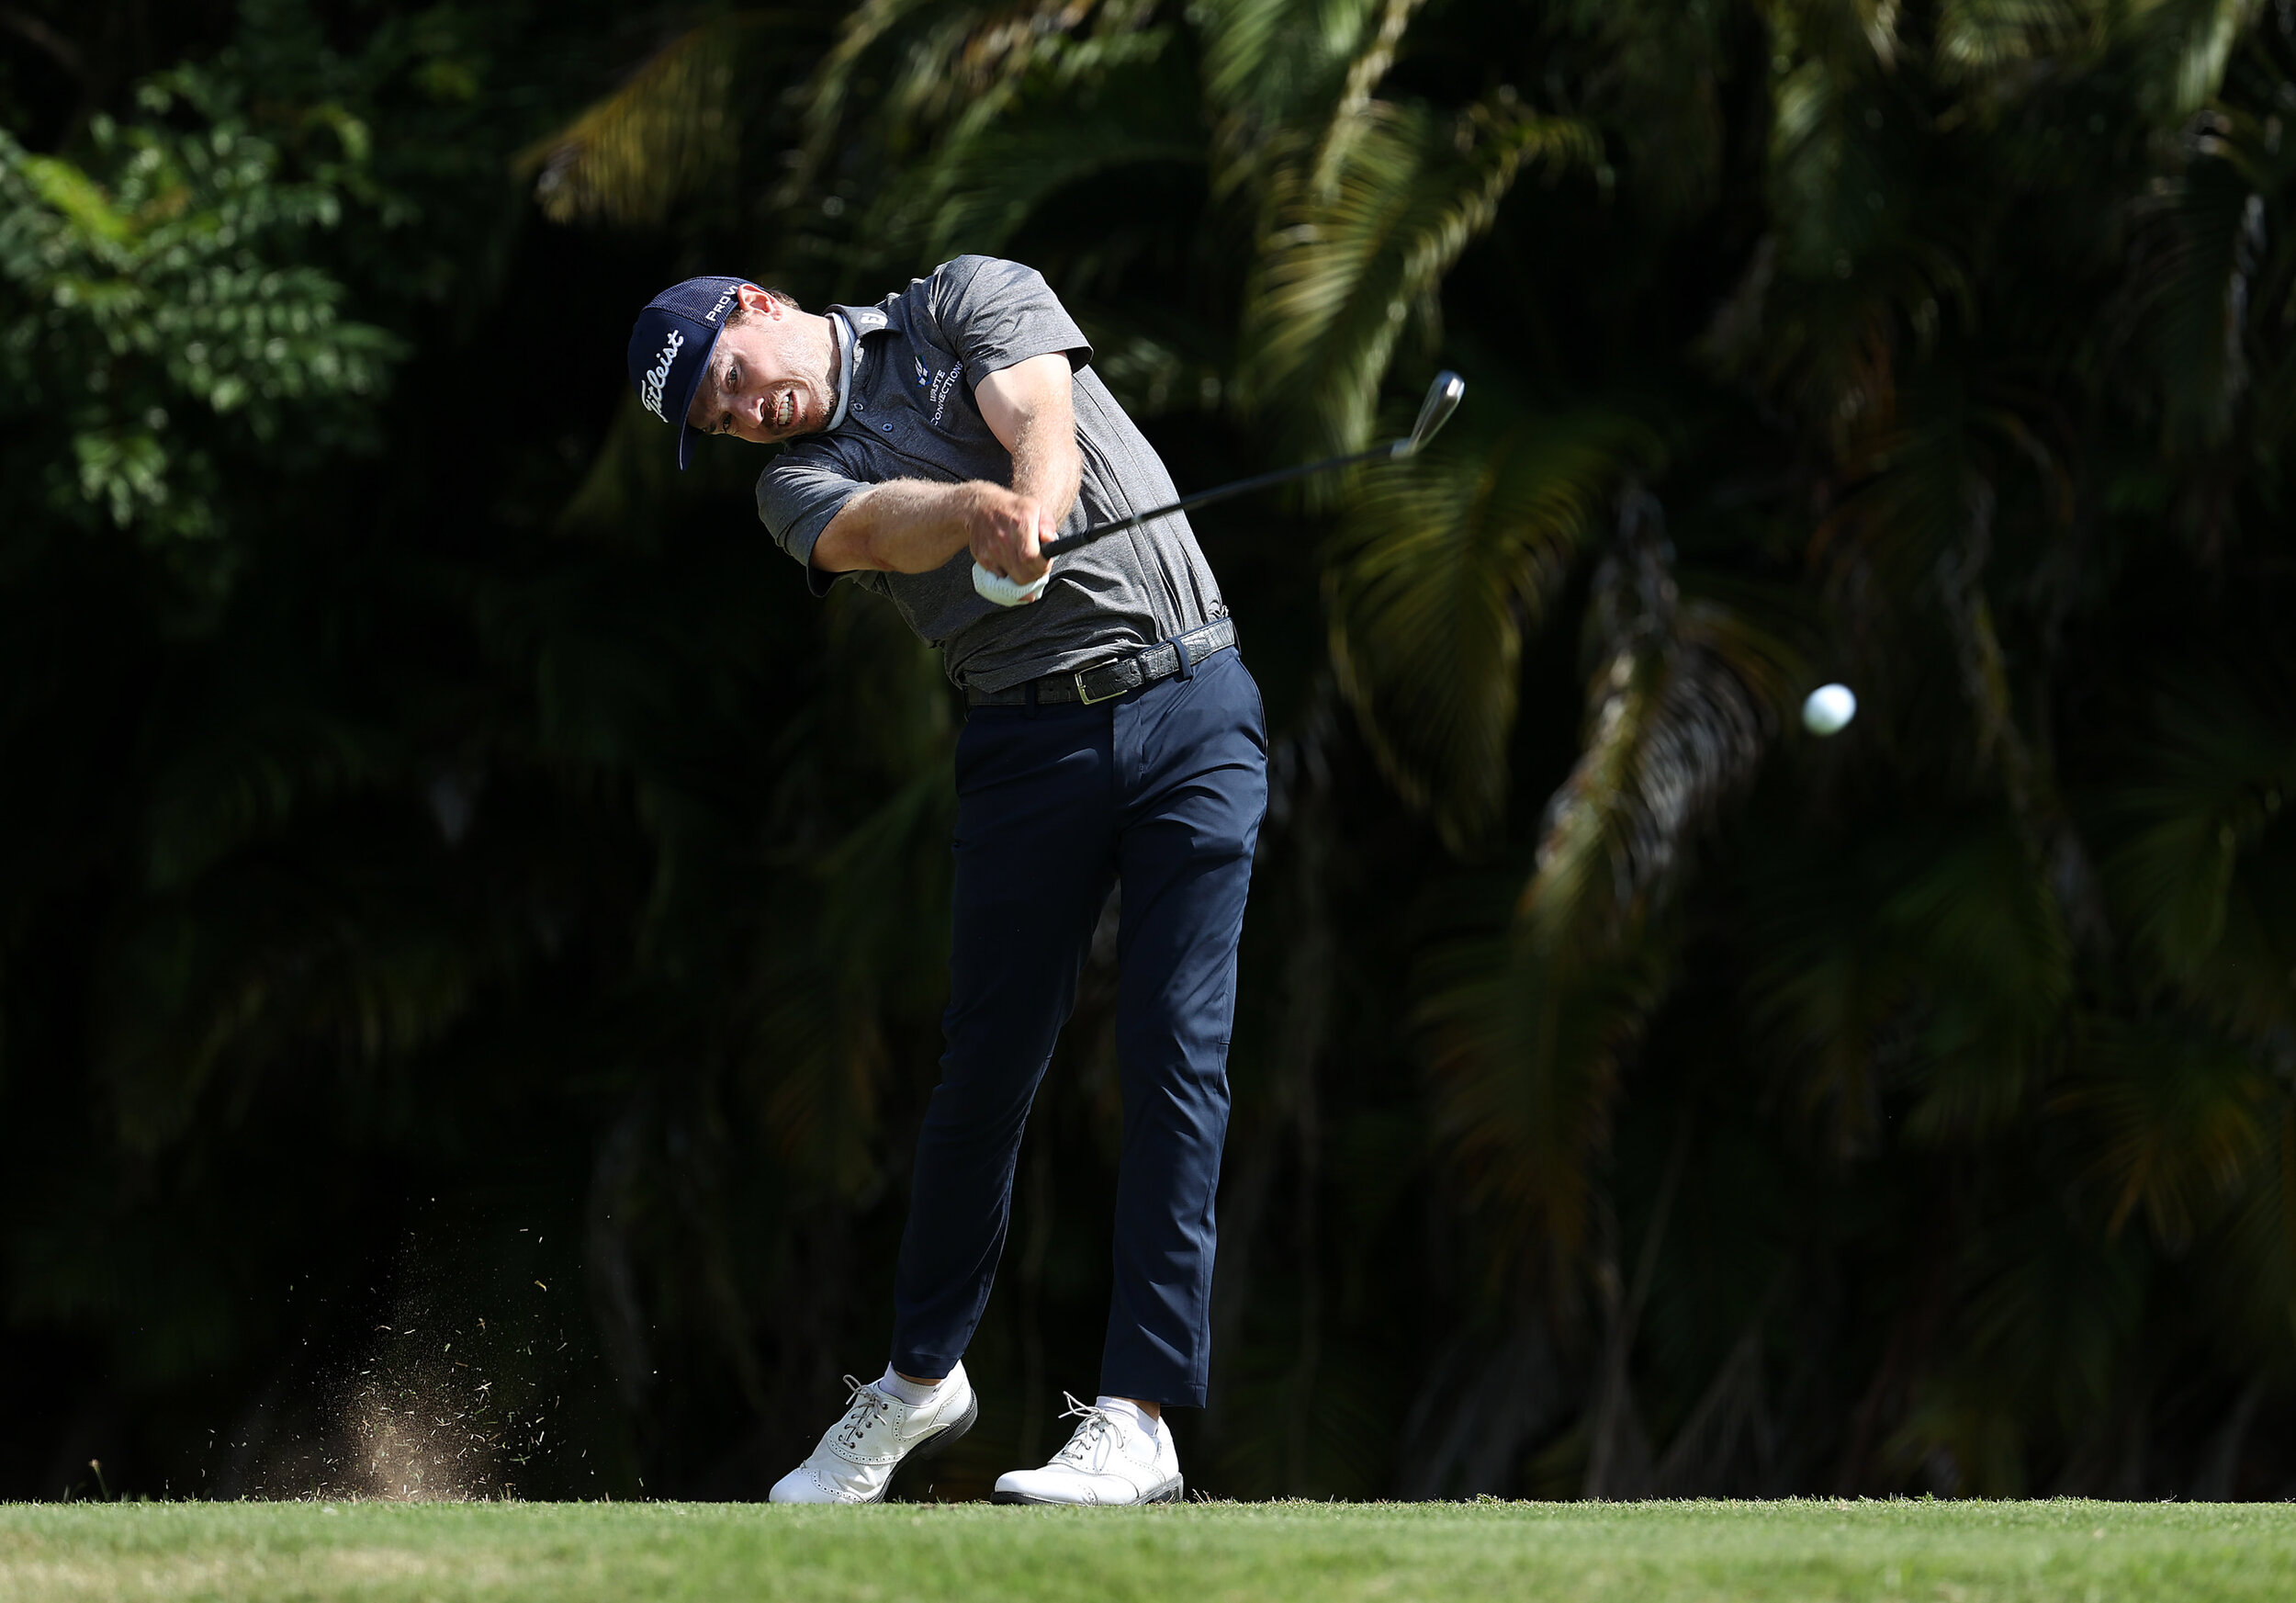  RIO GRANDE, PUERTO RICO - FEBRUARY 25: Bronson Burgoon plays his shot from the fourth tee during the first round of the Puerto Rico Open at Grand Reserve Country Club on February 25, 2021 in Rio Grande, Puerto Rico. (Photo by Andy Lyons/Getty Images